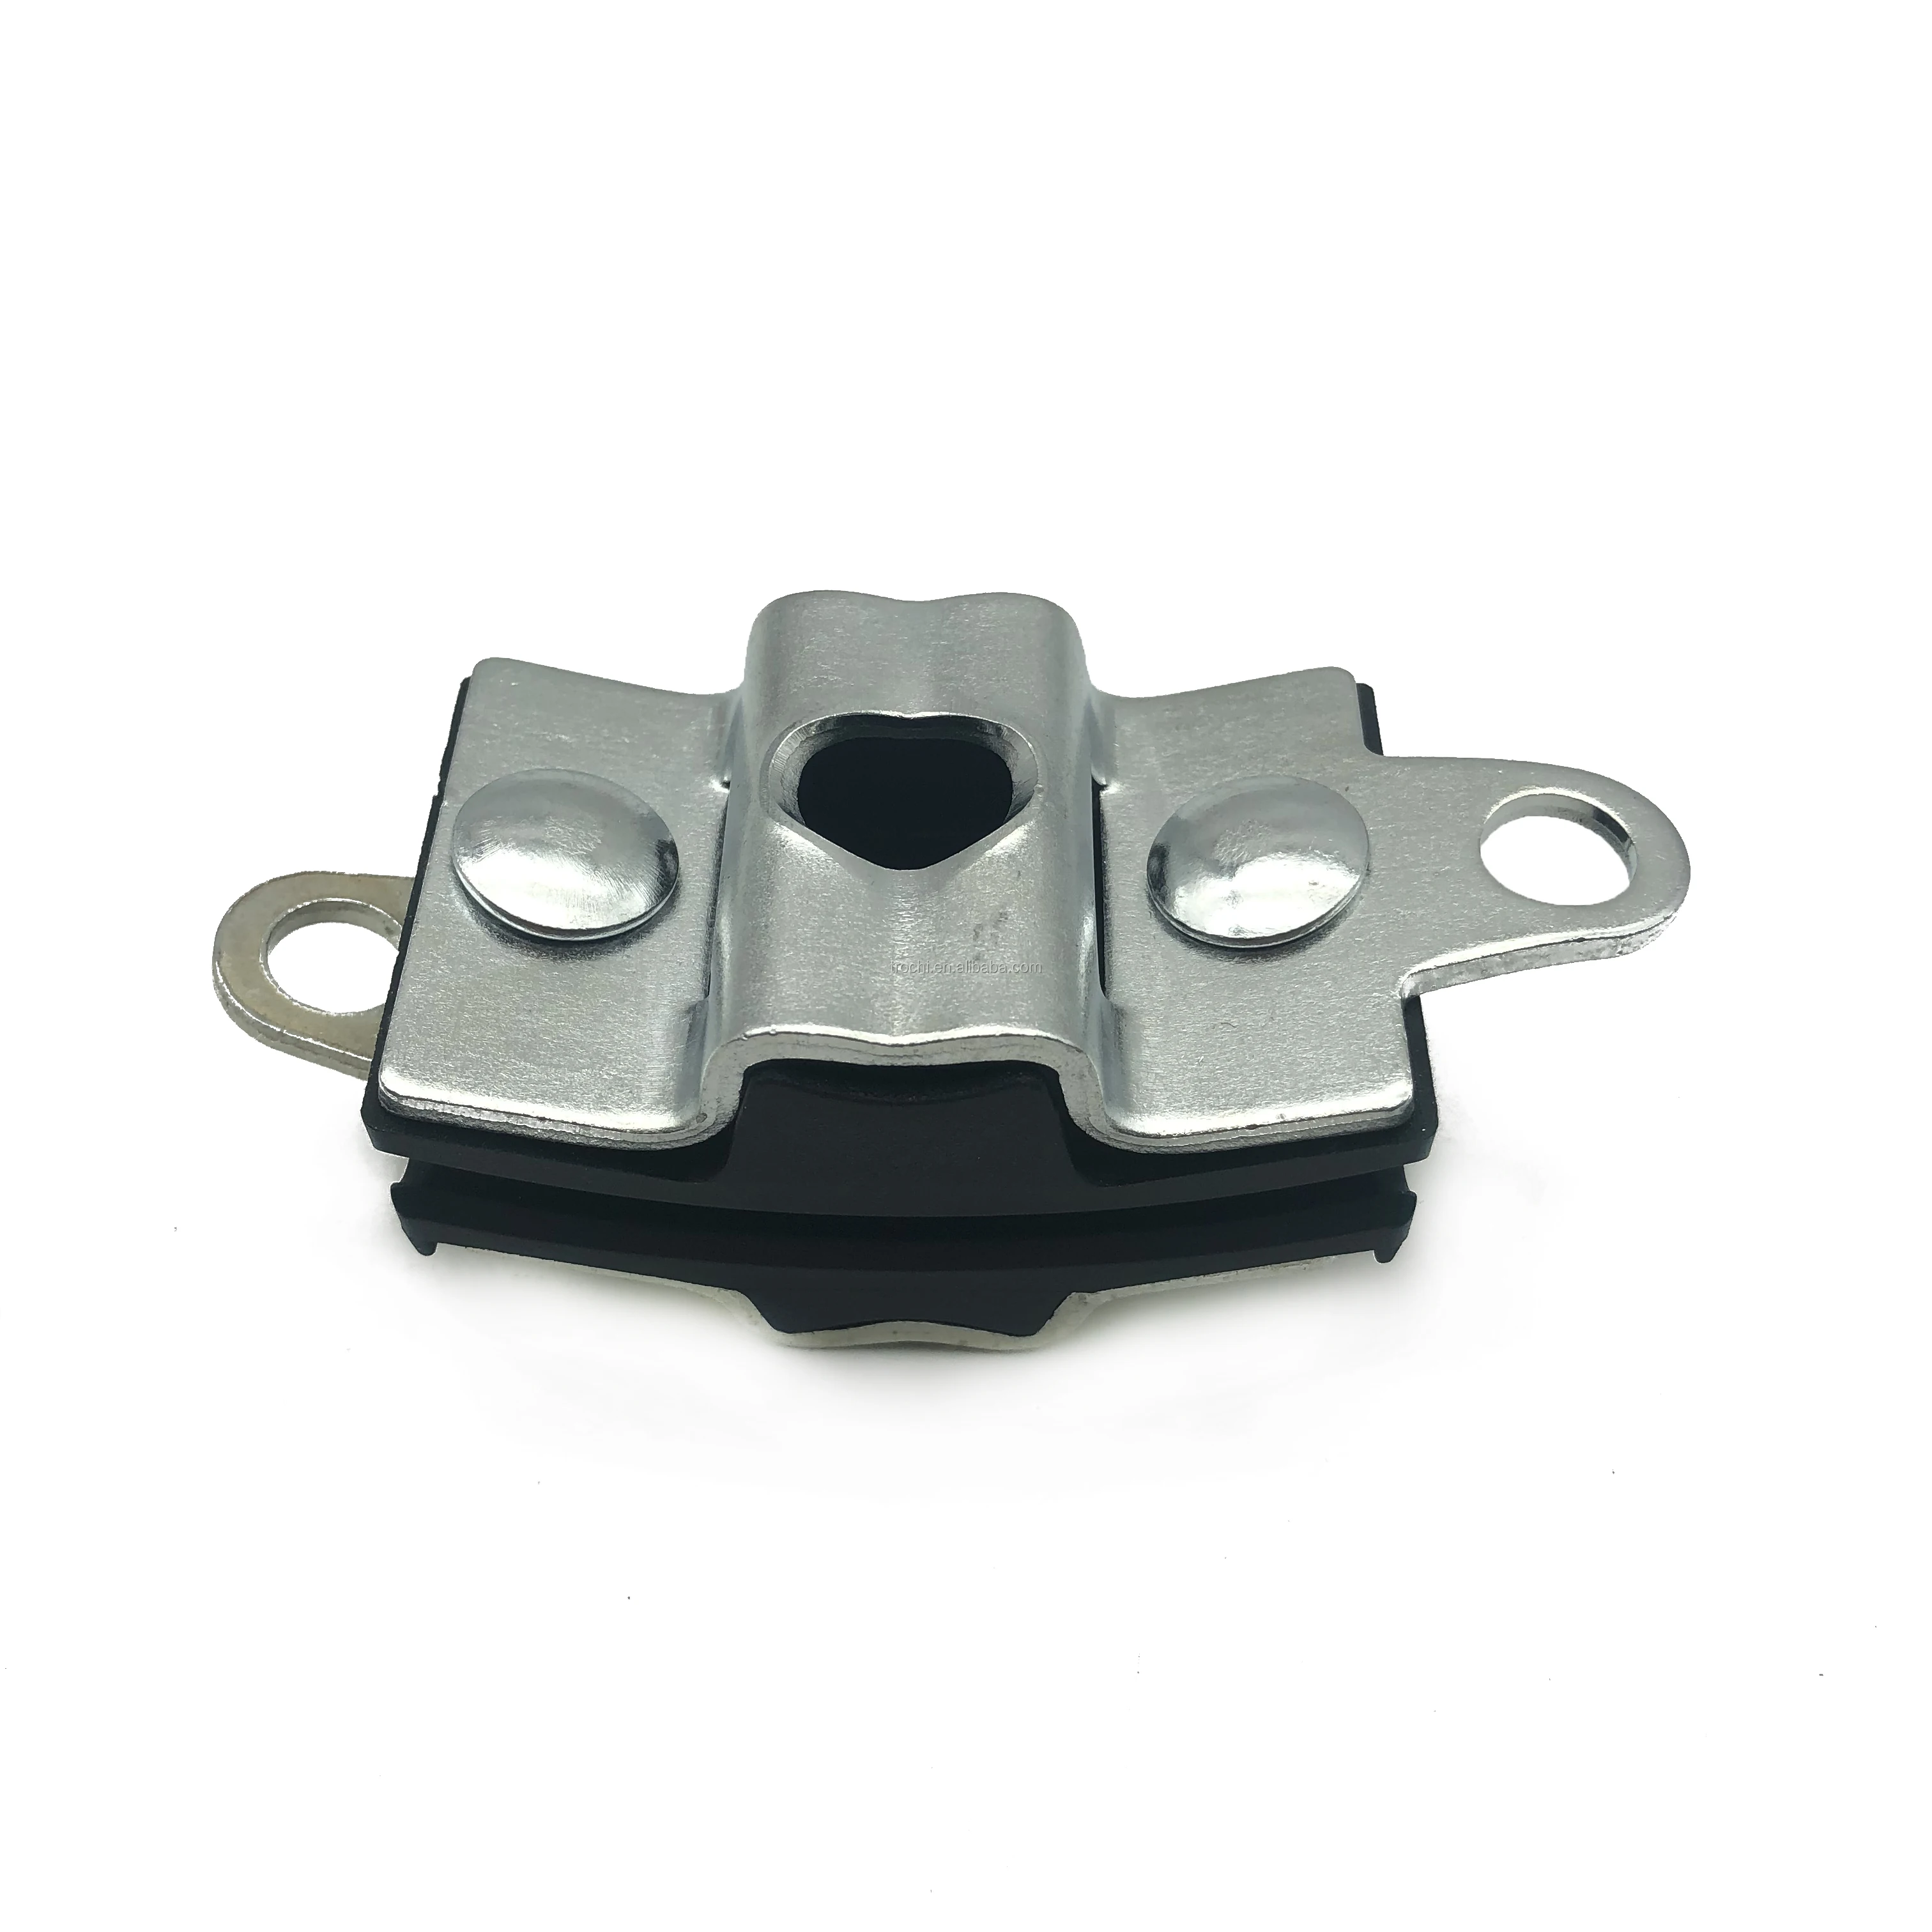 straight suspension clamp/clip for figure-8 fiber optic cable 3-7mm 7-11mm